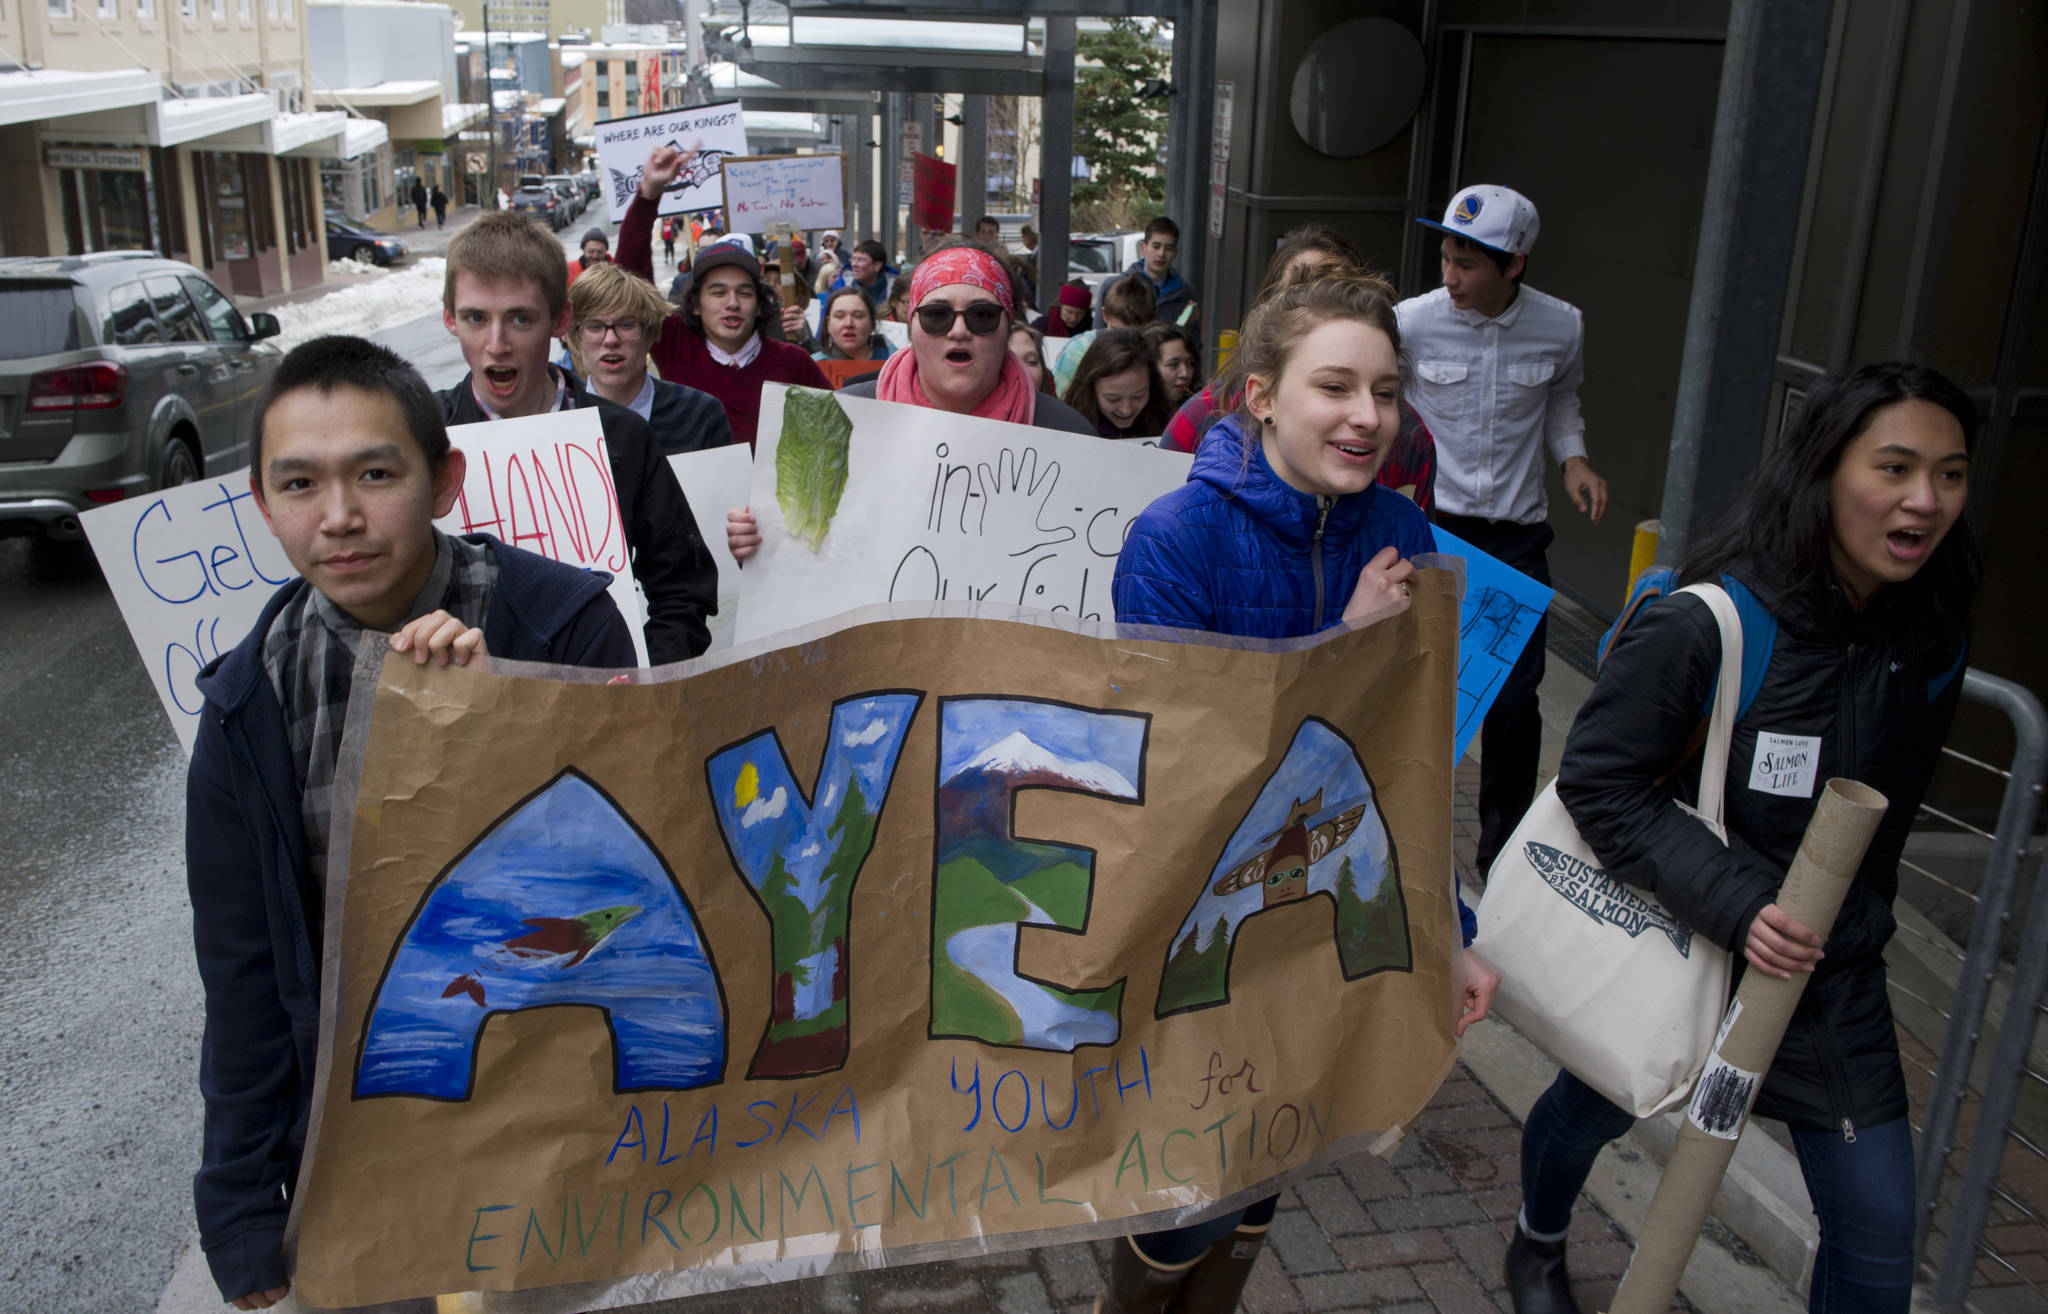 Nineteen high school teens from across the state, from Utqiagvik to Ketchikan, hold a March for Salmon as the culmination of this year’s Civics and Conservation Summit in Juneau, on Friday, March 17, 2017. The event is hosted by Alaska Youth for Environmental Action, a program of The Alaska Center in Anchorage, which trains young people to be environmental leaders. (Michael Penn | Juneau Empire)